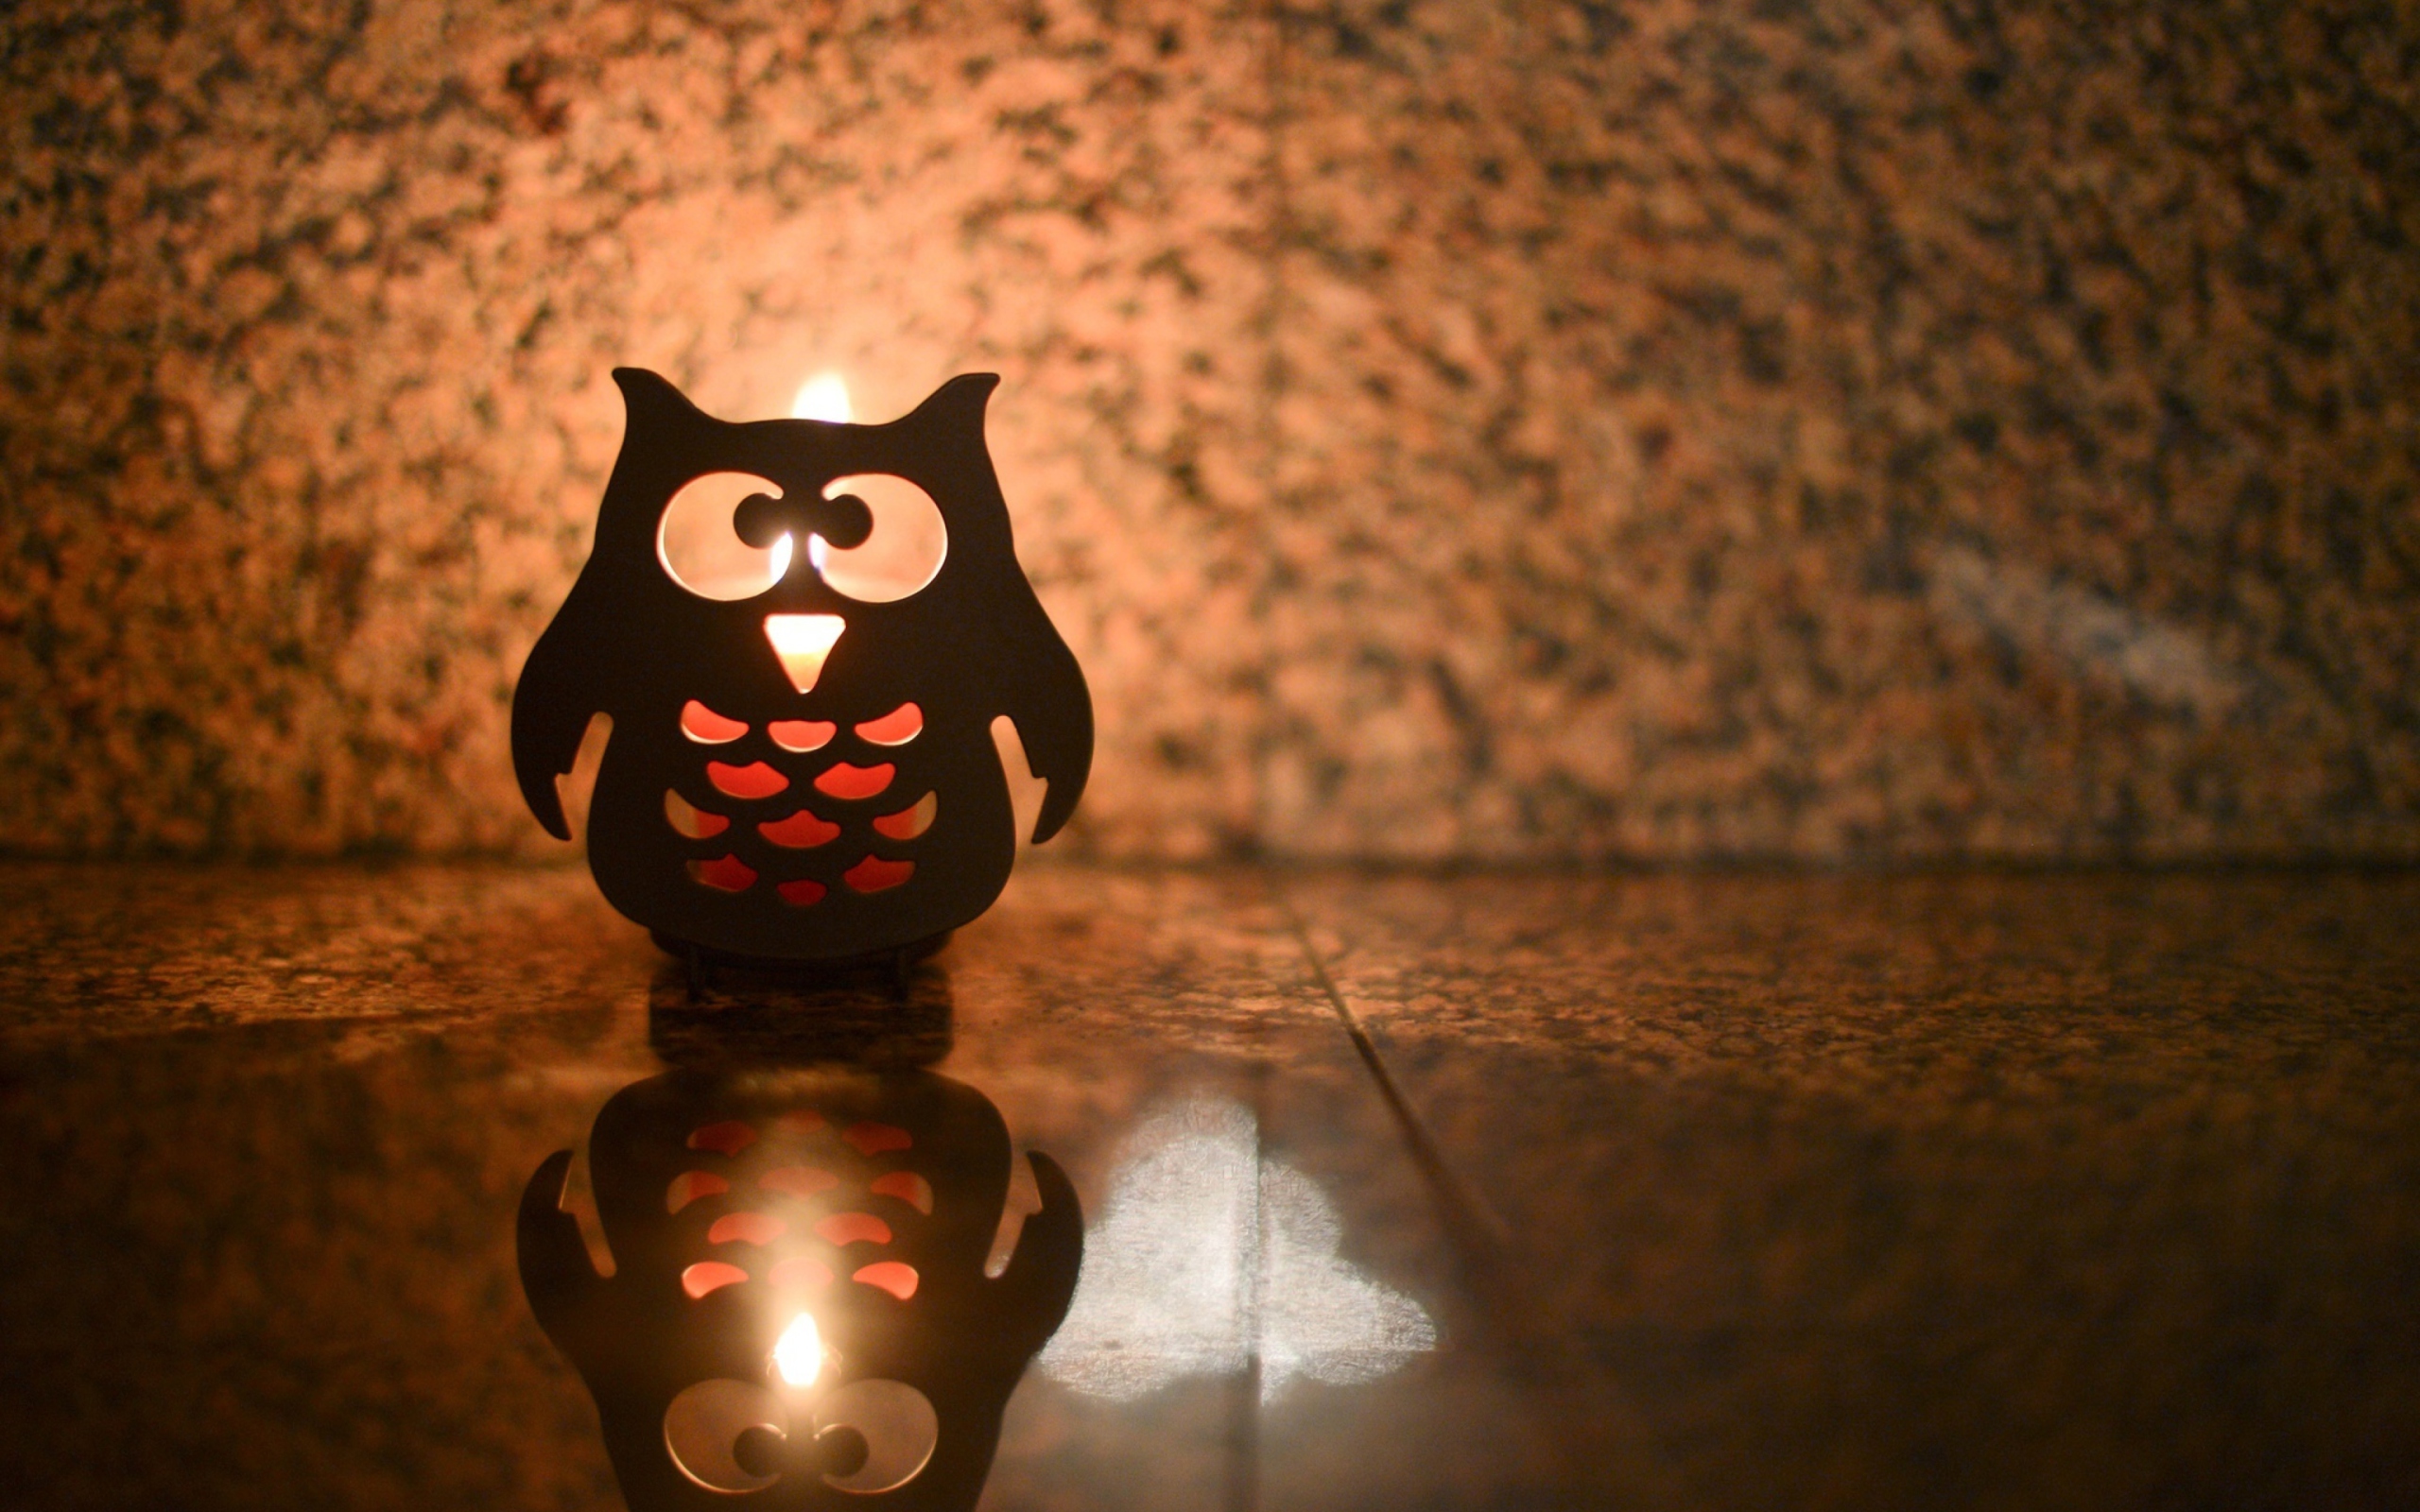 Owl Candle wallpaper 2560x1600